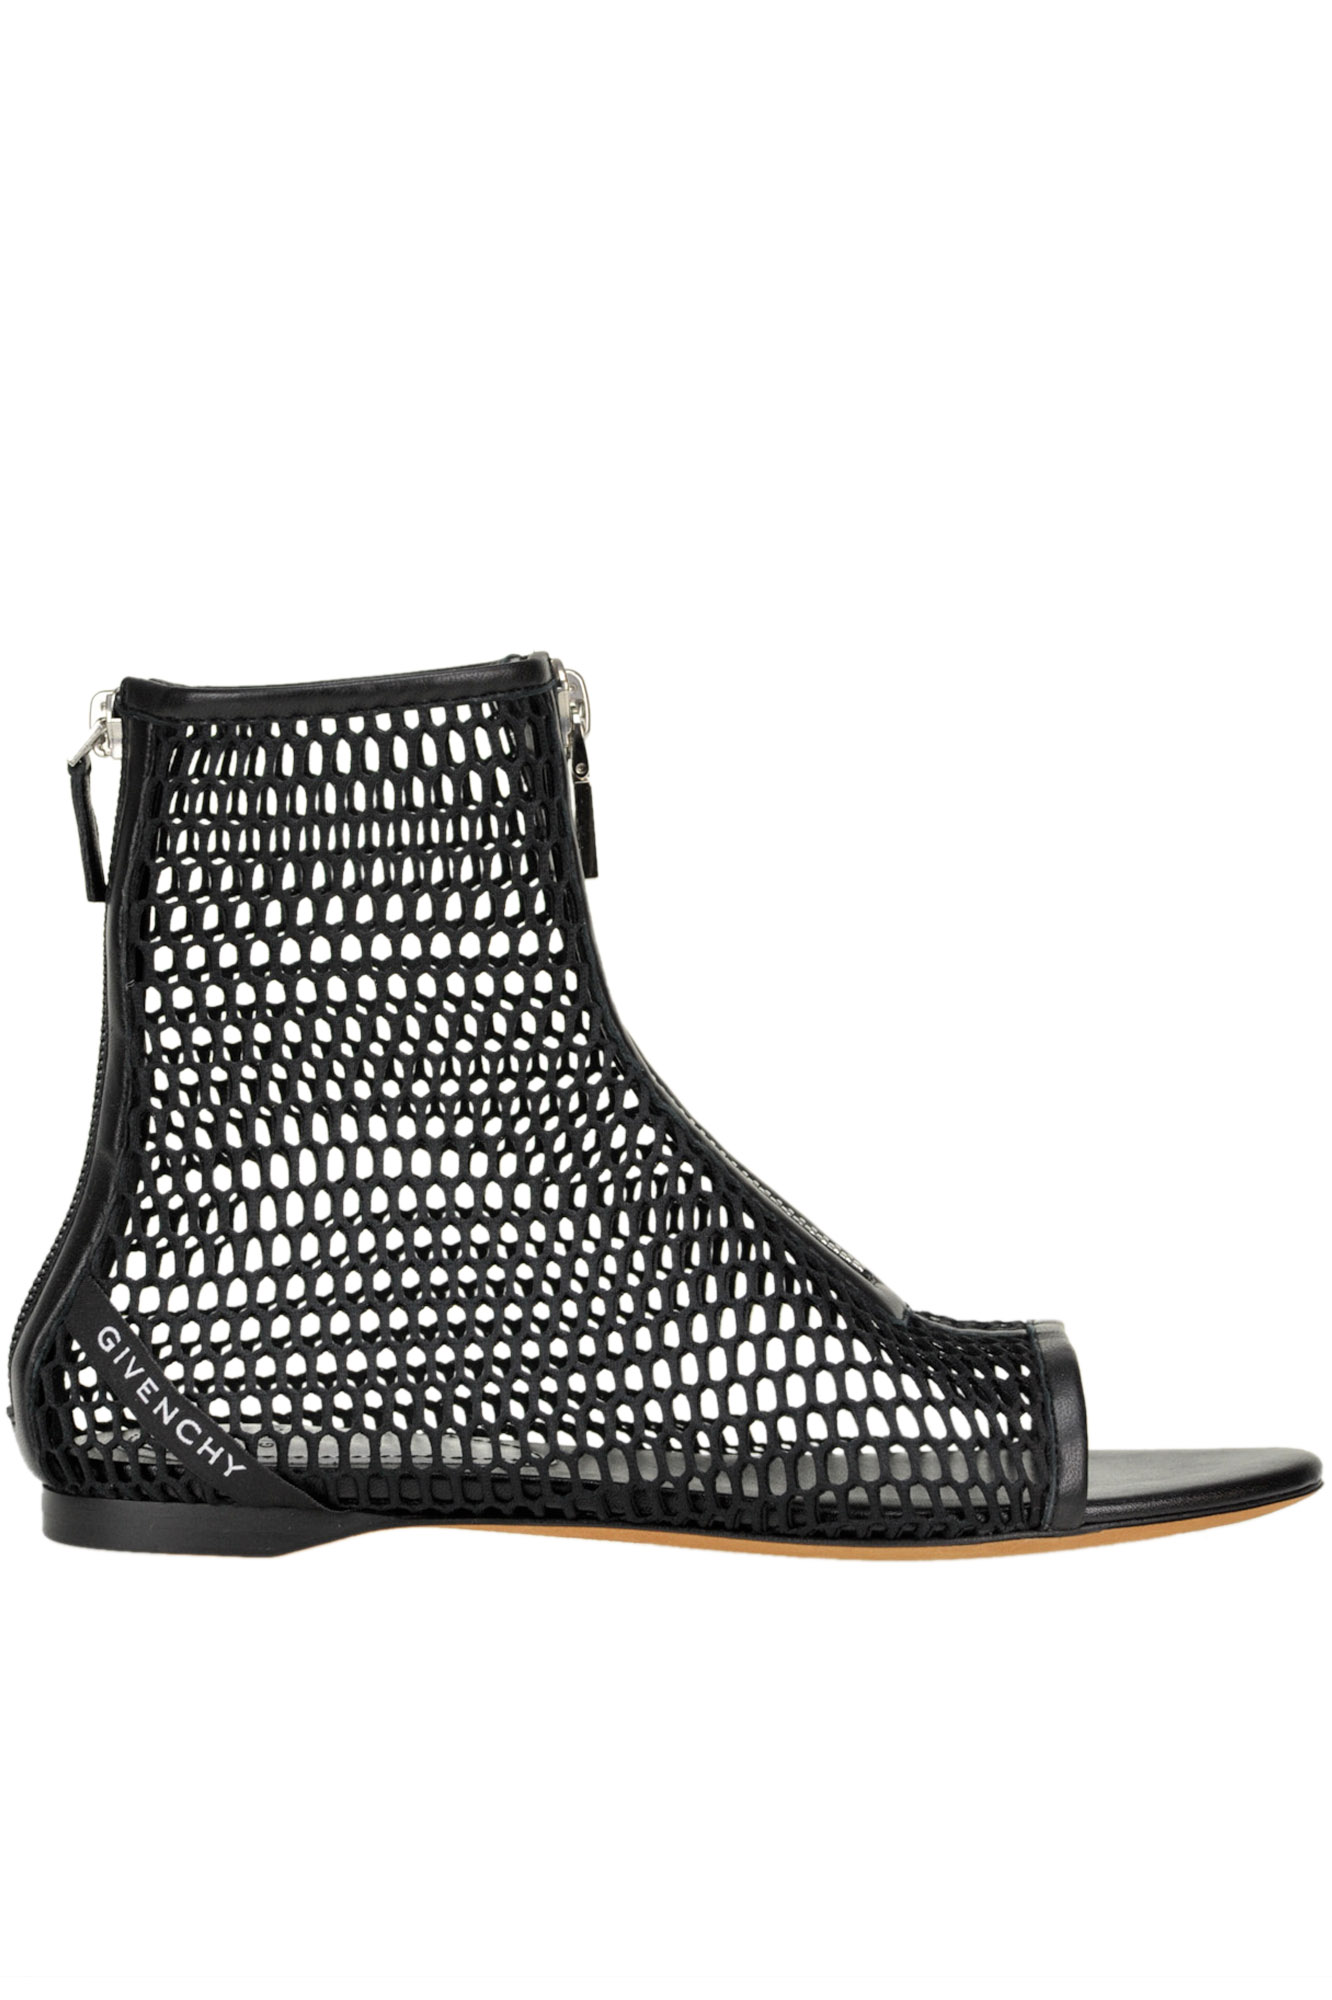 Givenchy Cut-out Neoprene Ankle-boots In Black